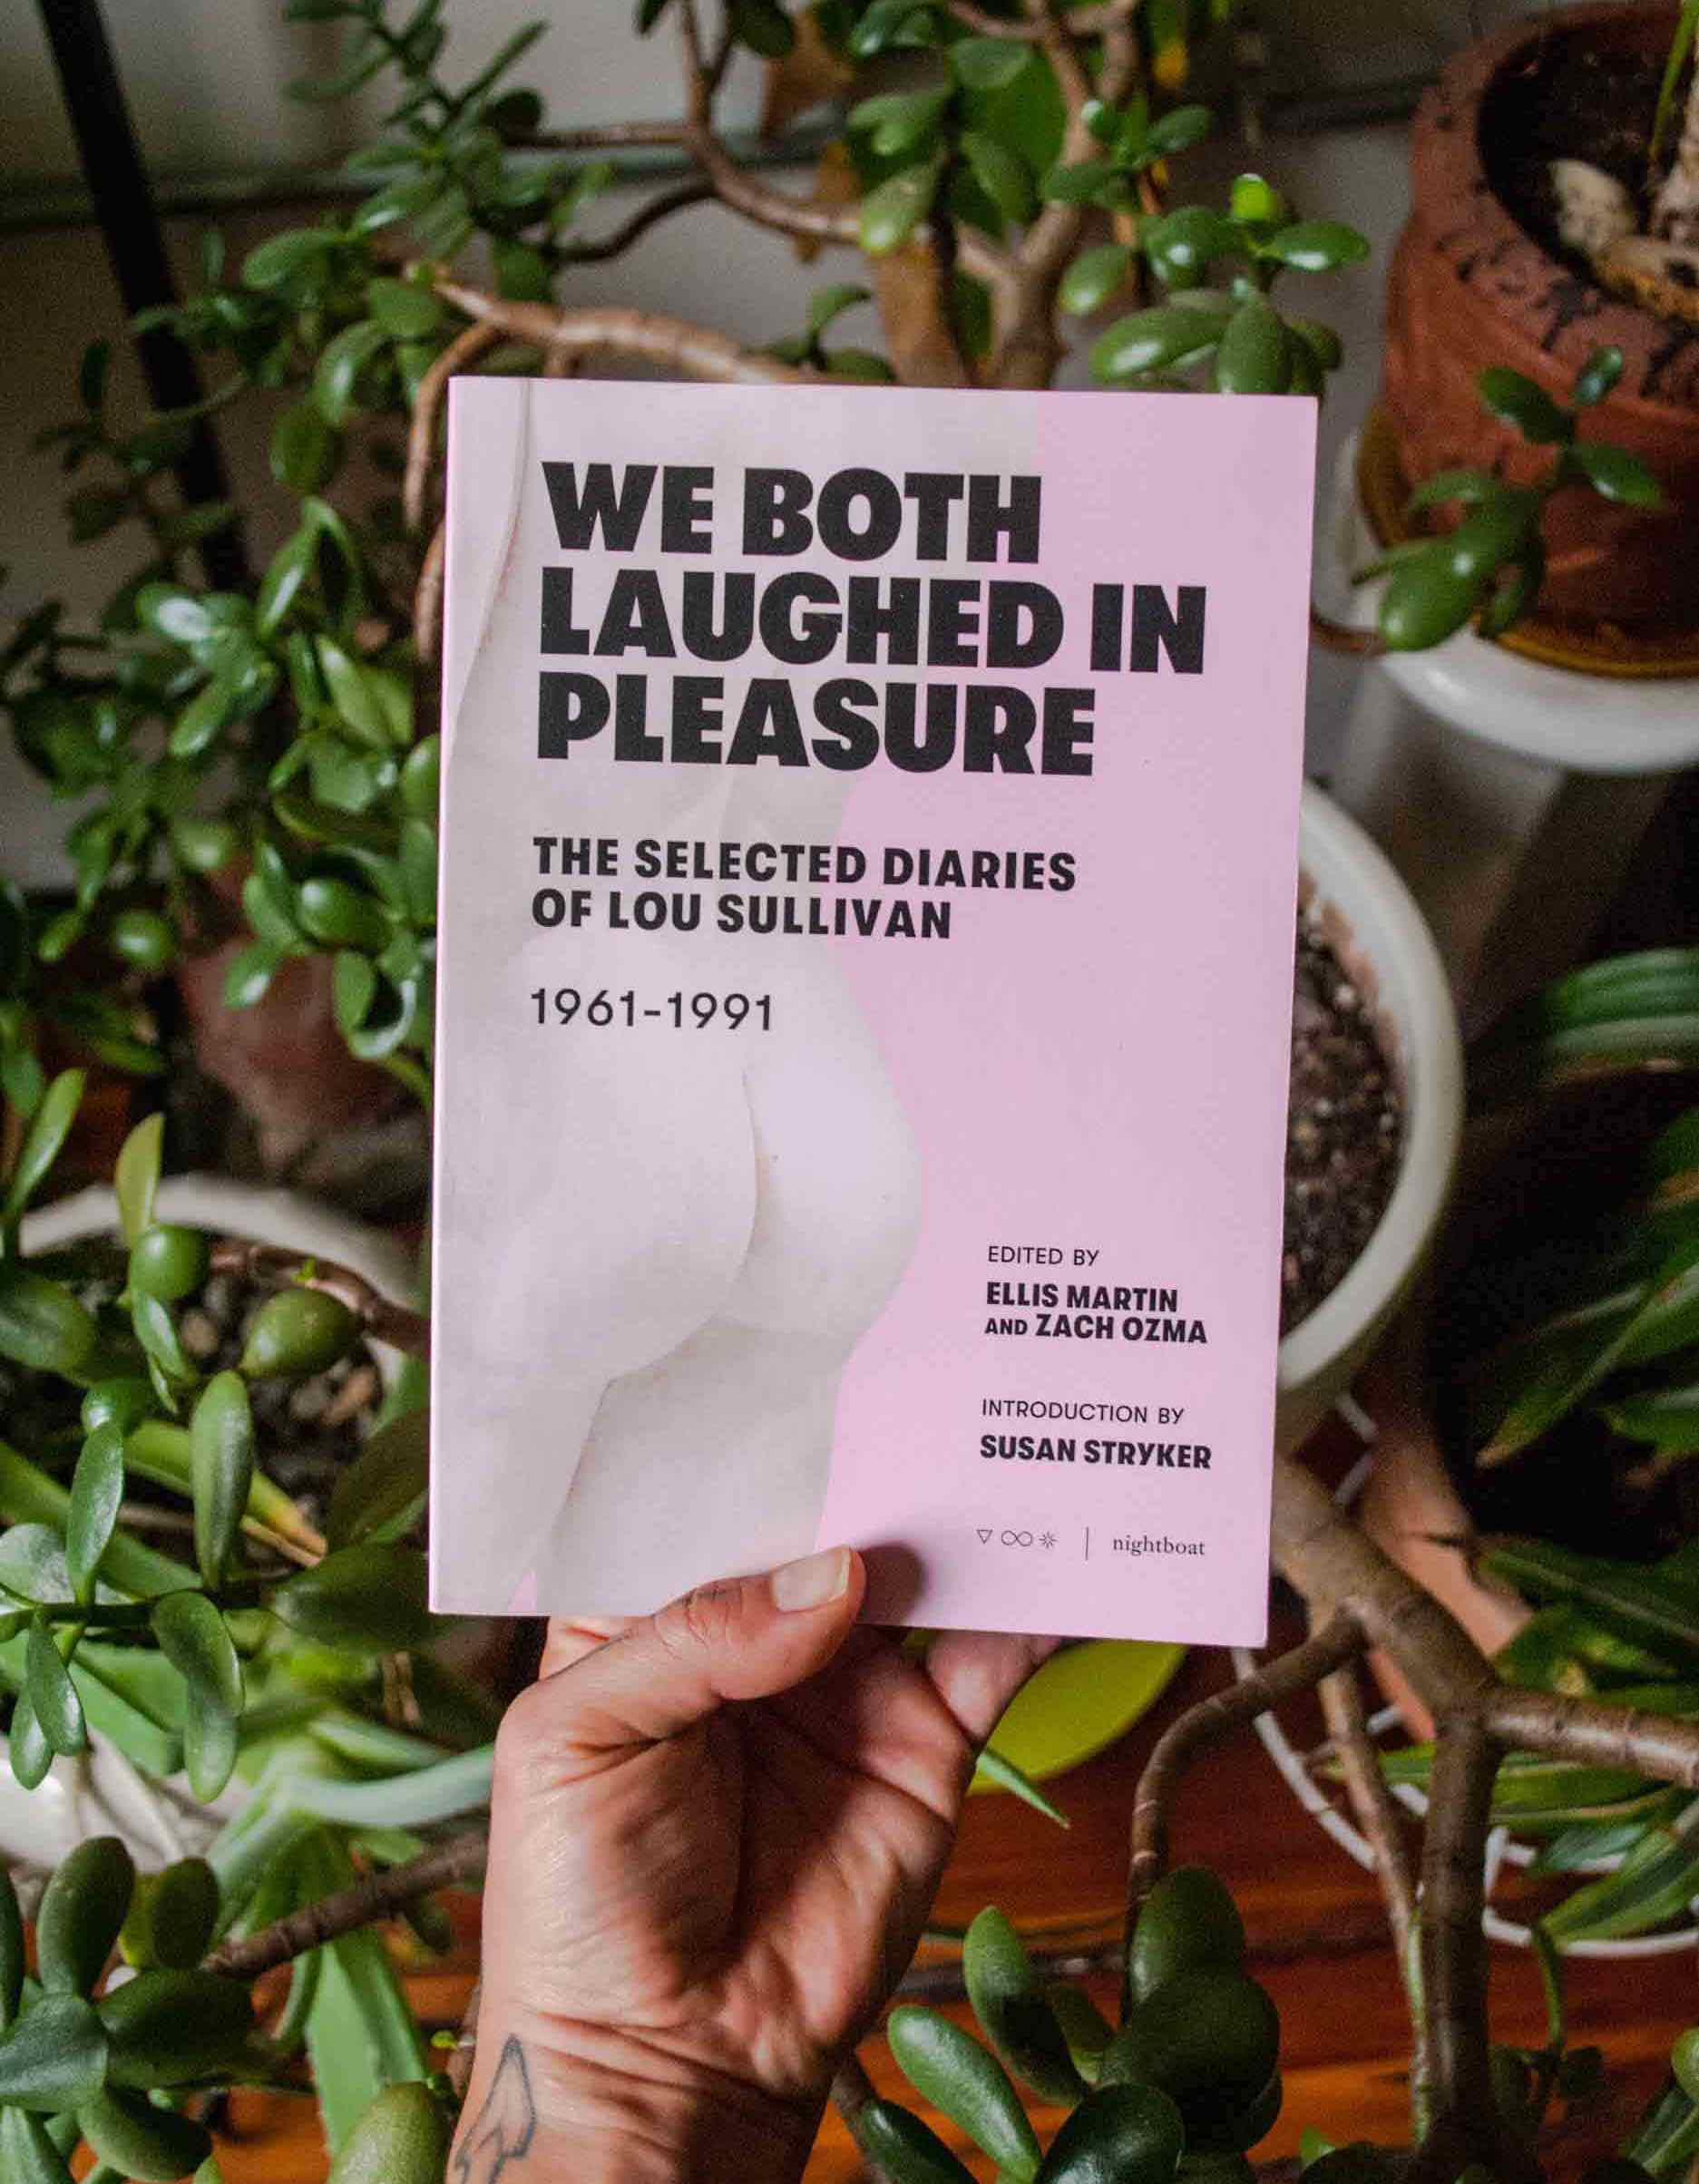 I'm holding the book with its pink cover over a sprawling jade plant in my room